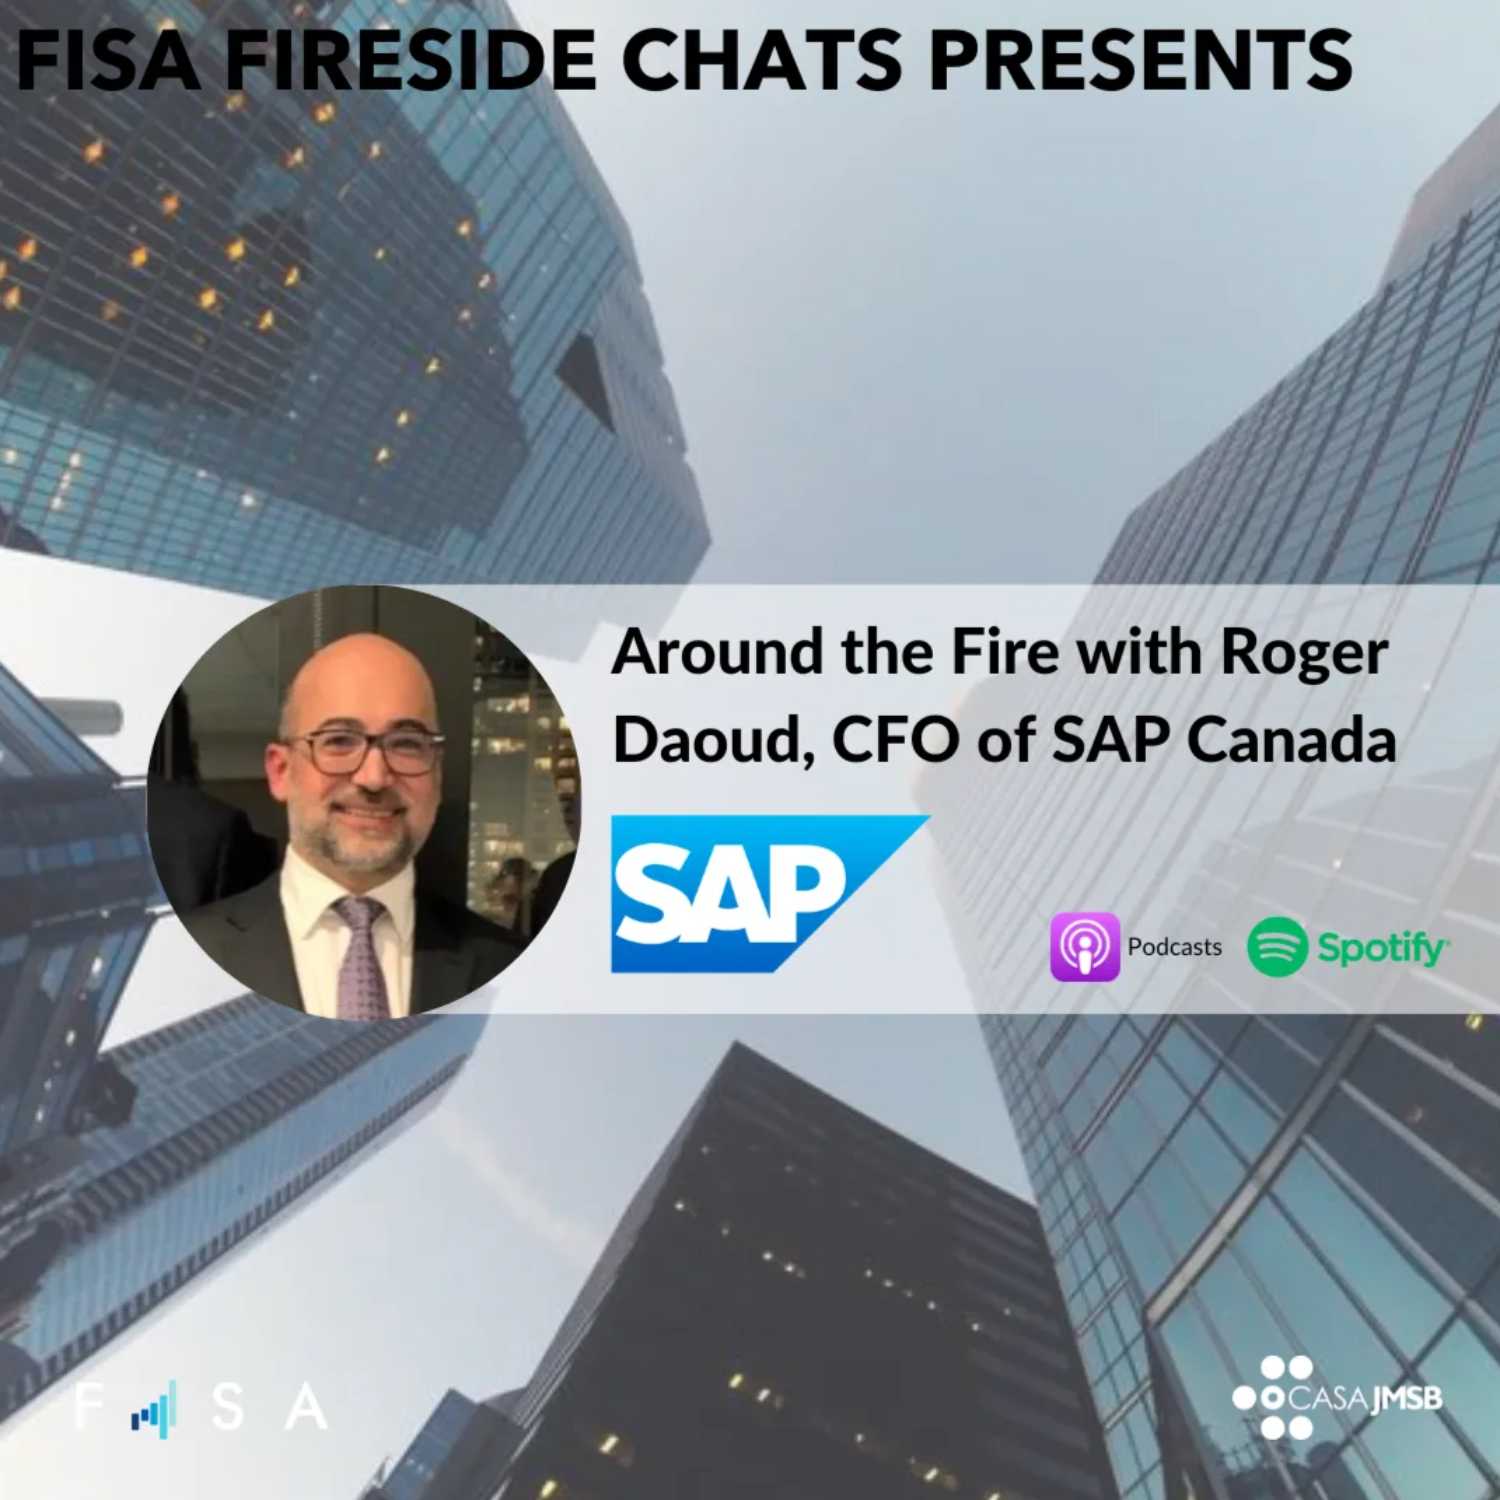 Around the Fire with Roger Daoud, Chief Financial Officer of SAP Canada